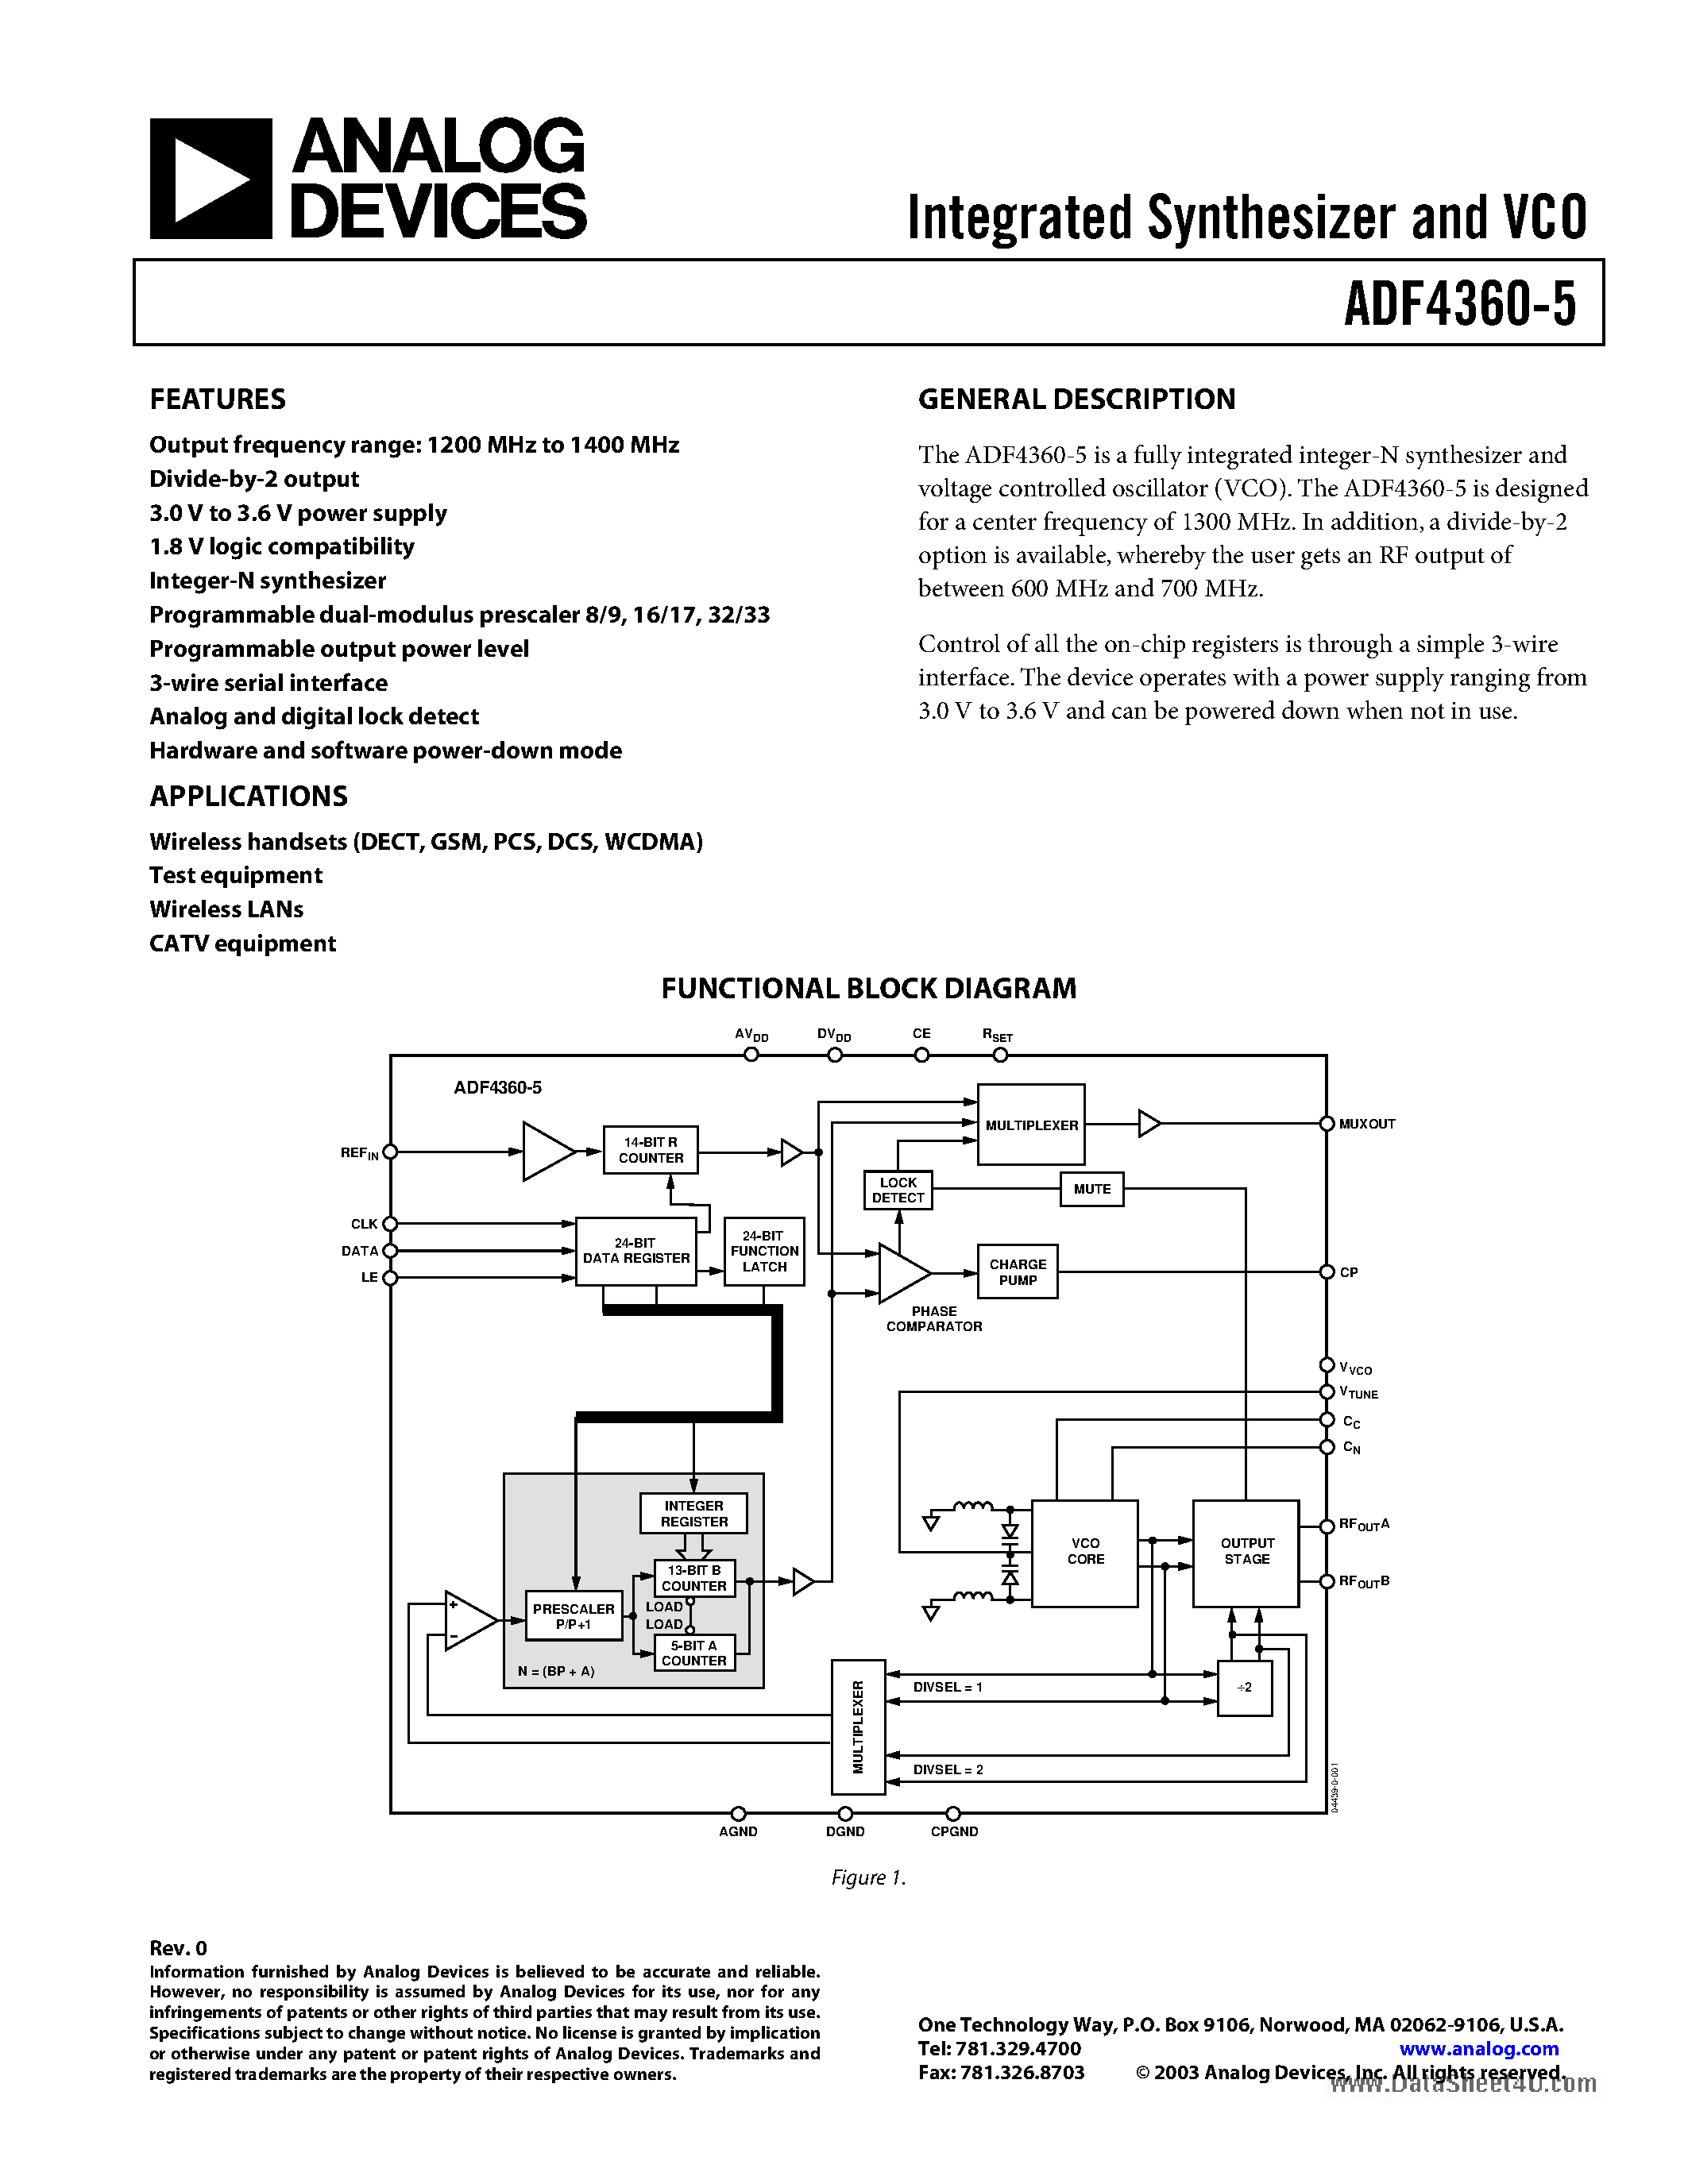 Даташит ADF4360-5 - Integrated Synthesizer and VCO страница 1